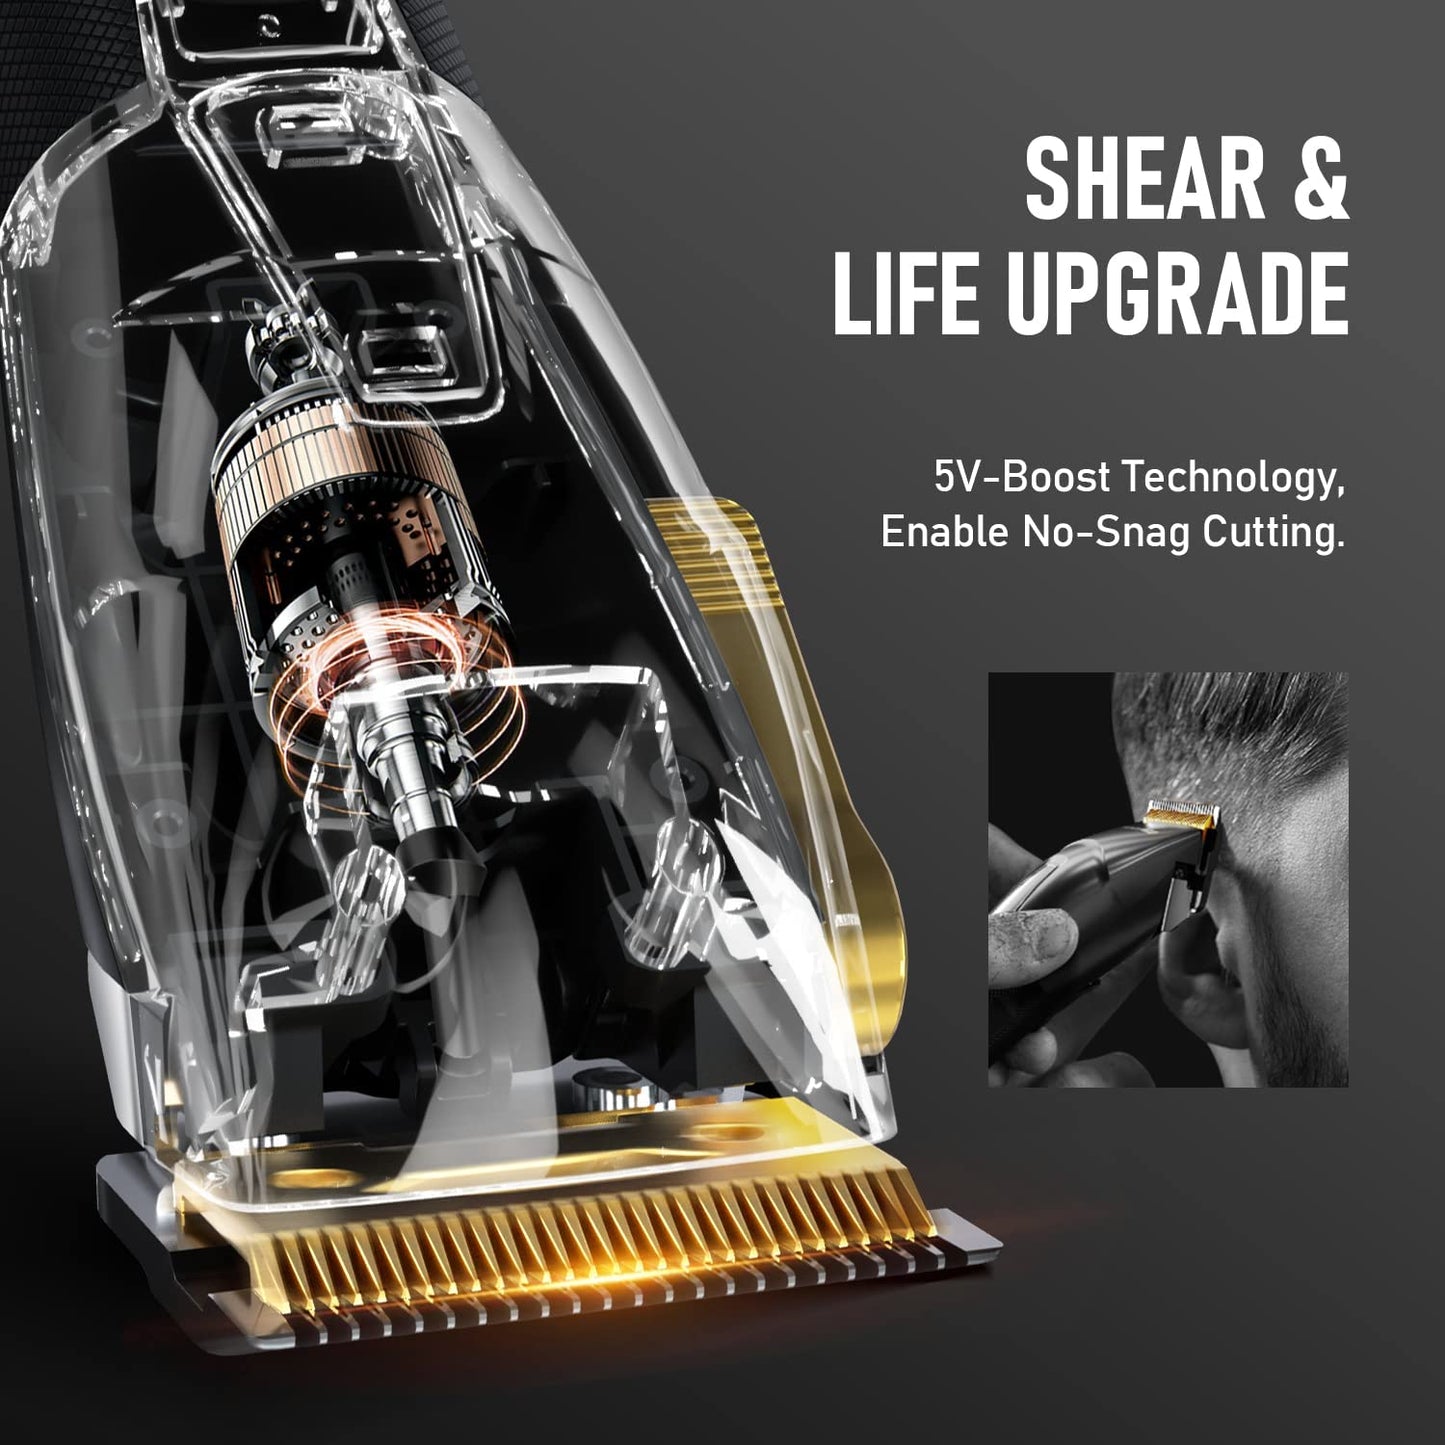 ZEUS Professional Hair Clippers Combo HC735BX